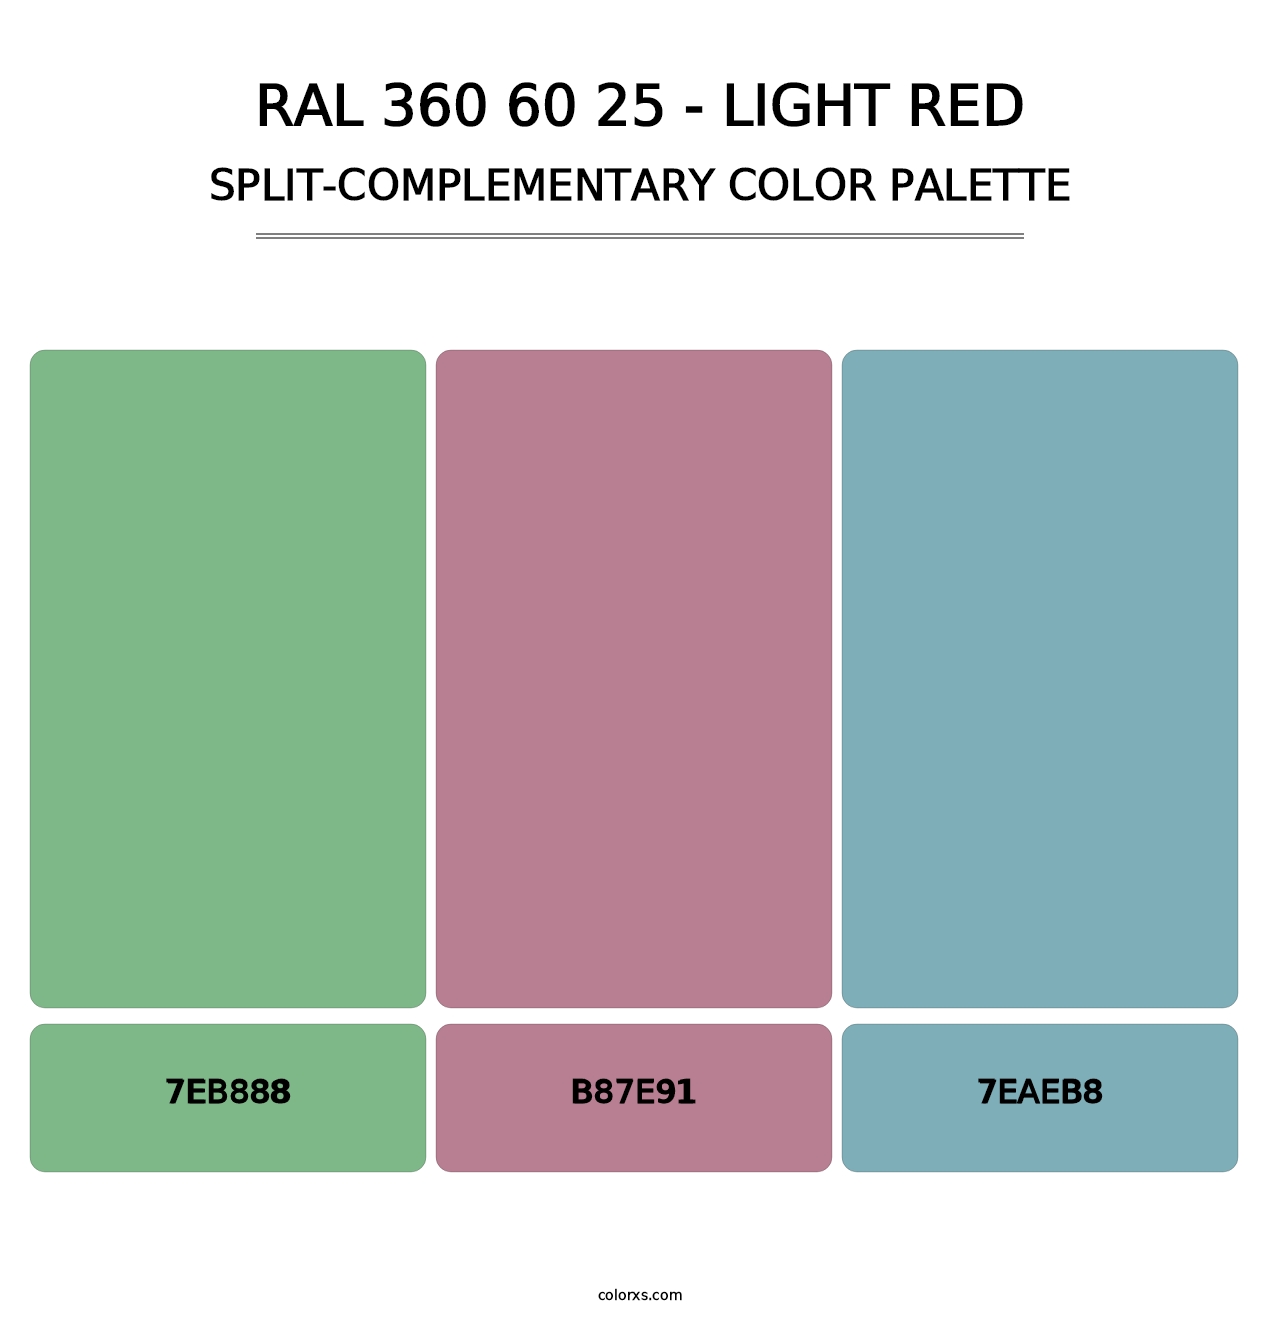 RAL 360 60 25 - Light Red - Split-Complementary Color Palette